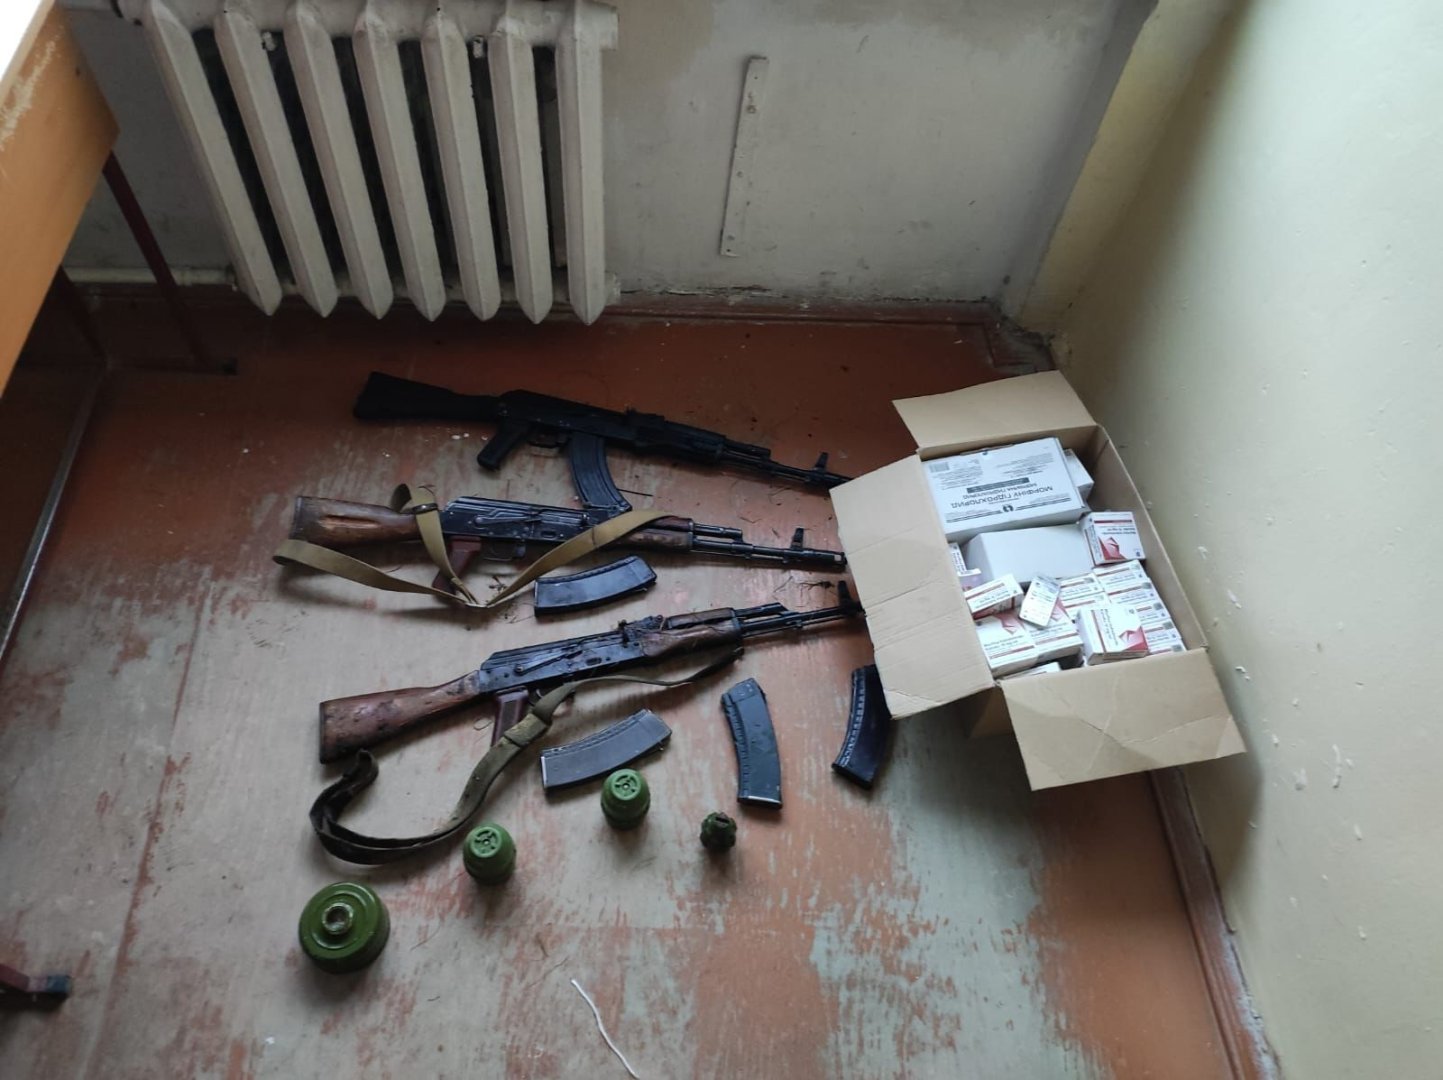 Ammunition, communication devices uncovered in Azerbaijan's Khankendi city